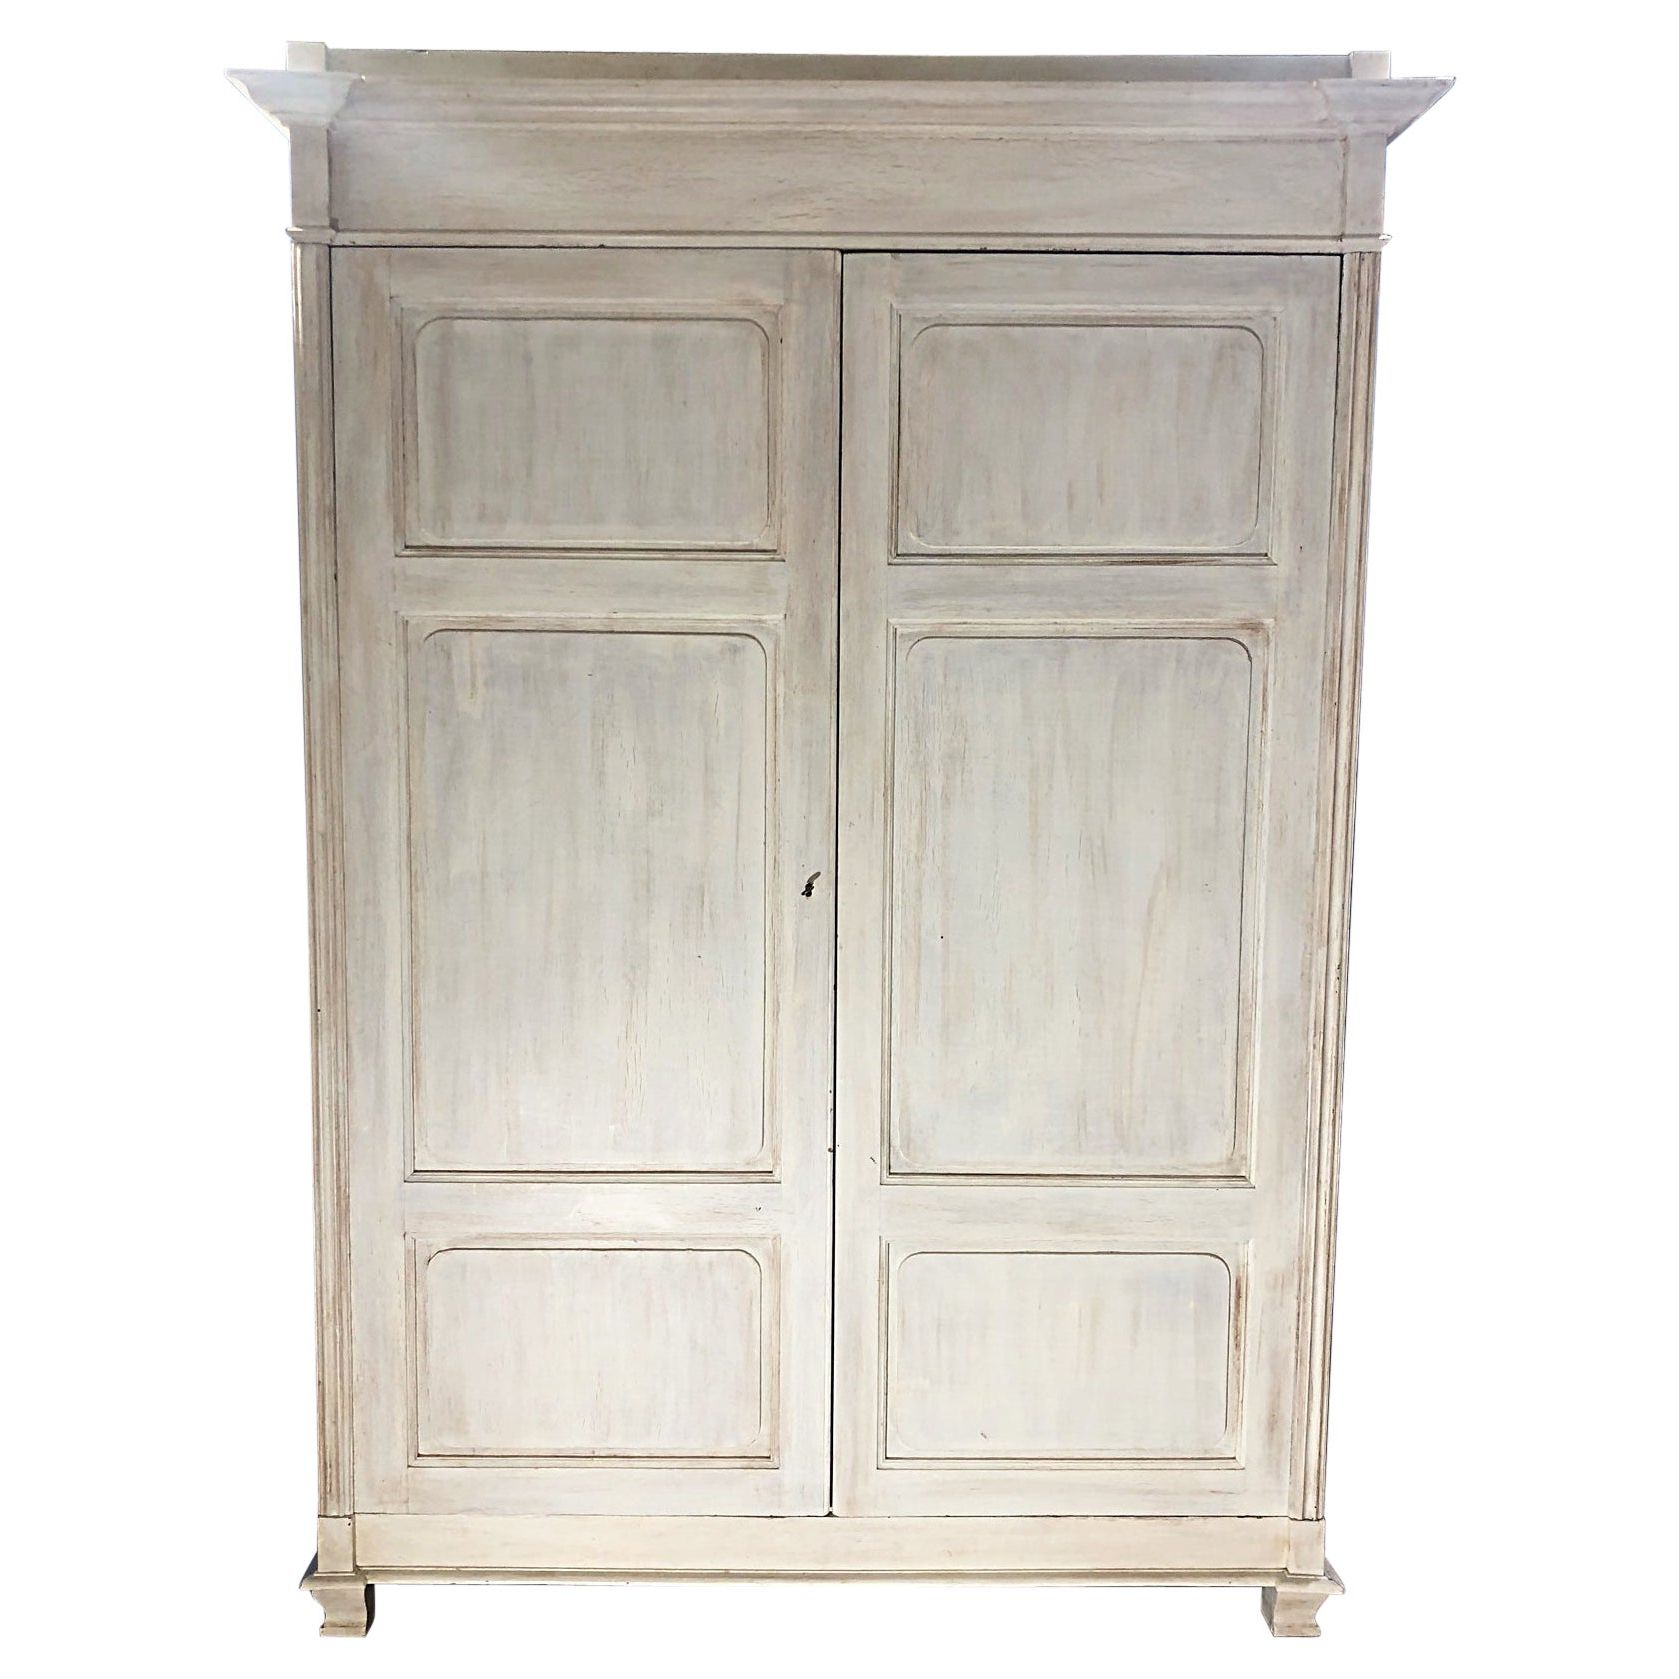 Italian Wardrobe Of The Twentieth Century In Chestnut And Pine With Drawers  For Sale At 1stdibs With Shabby Chic Pine Wardrobes (View 16 of 20)